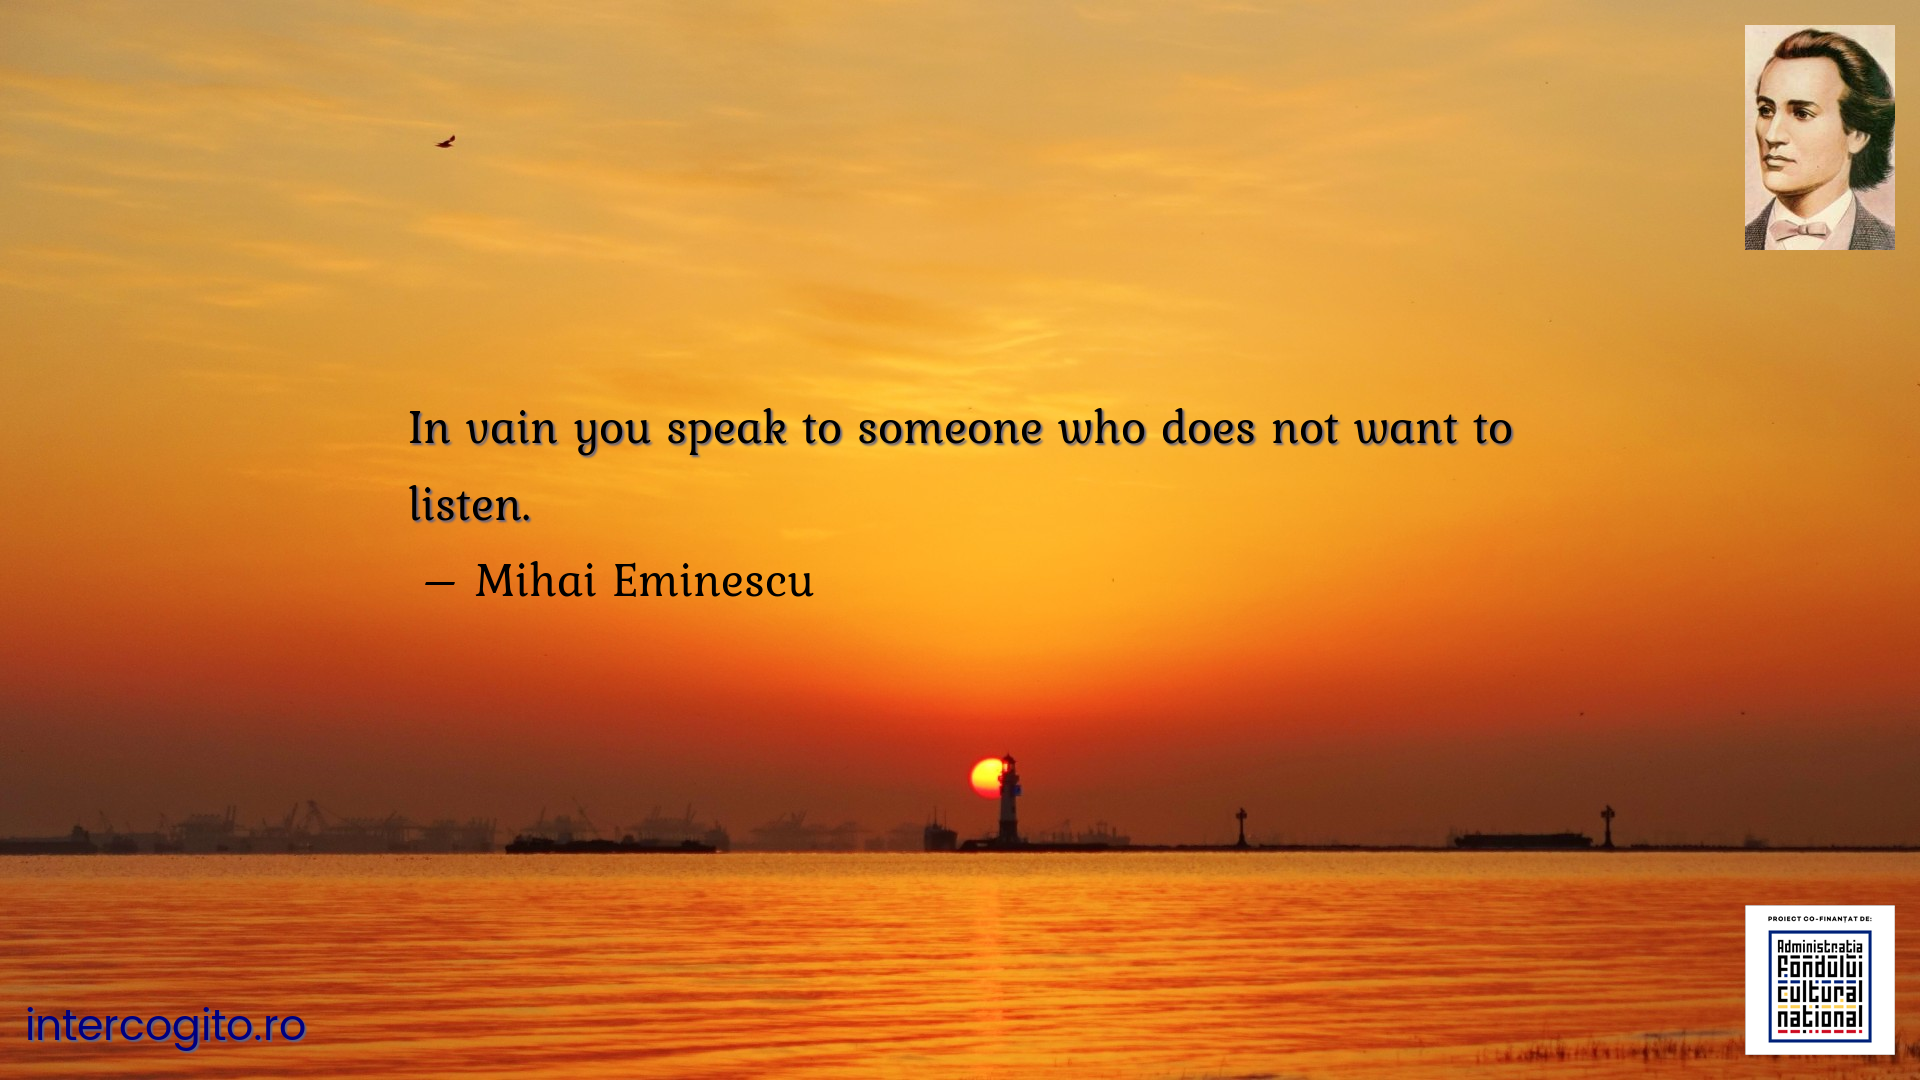 In vain you speak to someone who does not want to listen.